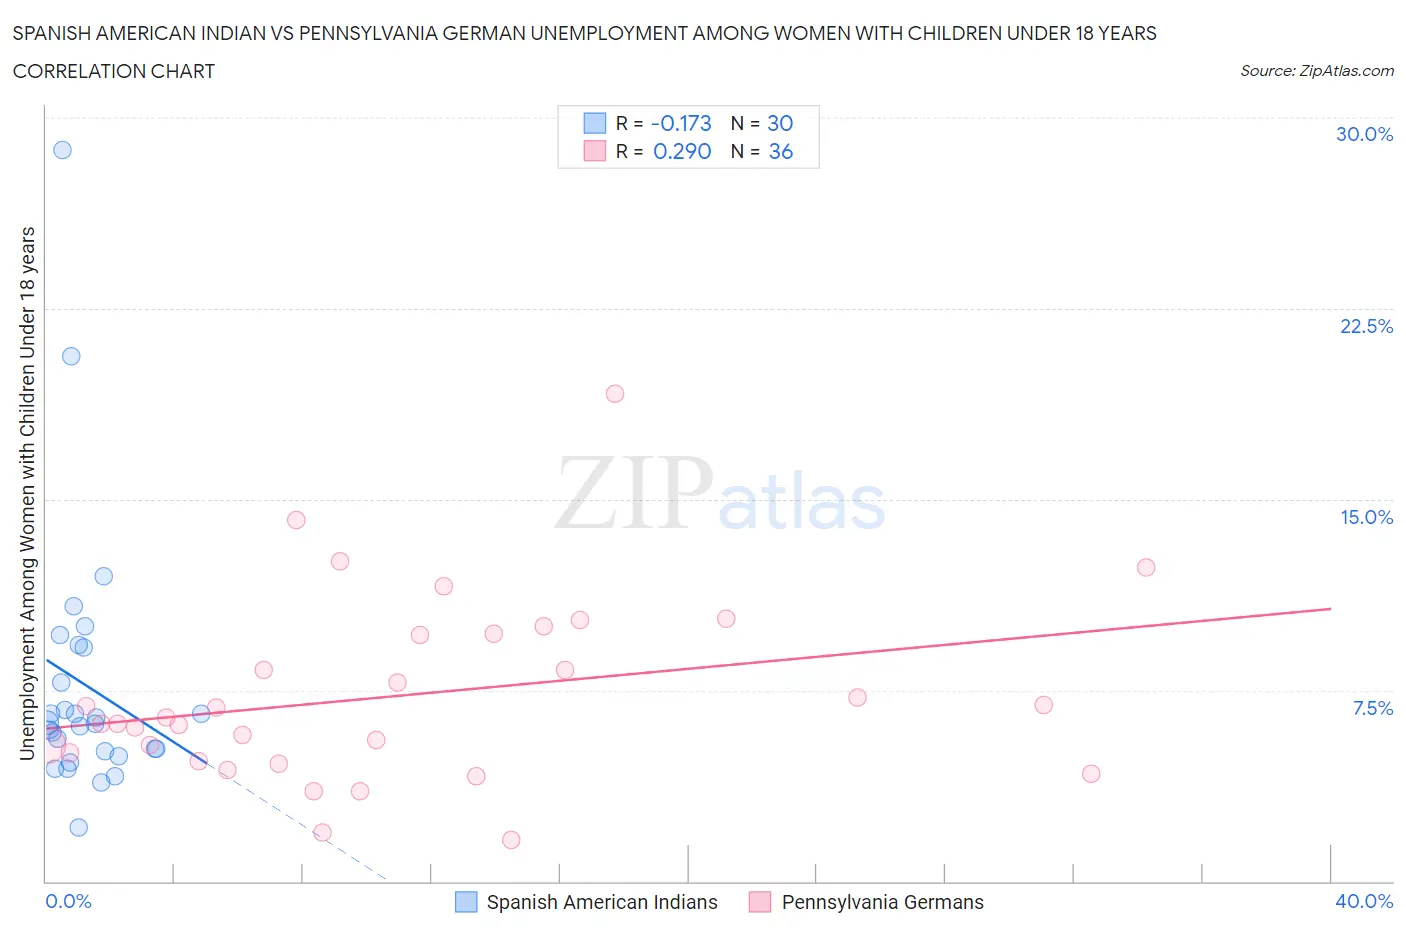 Spanish American Indian vs Pennsylvania German Unemployment Among Women with Children Under 18 years